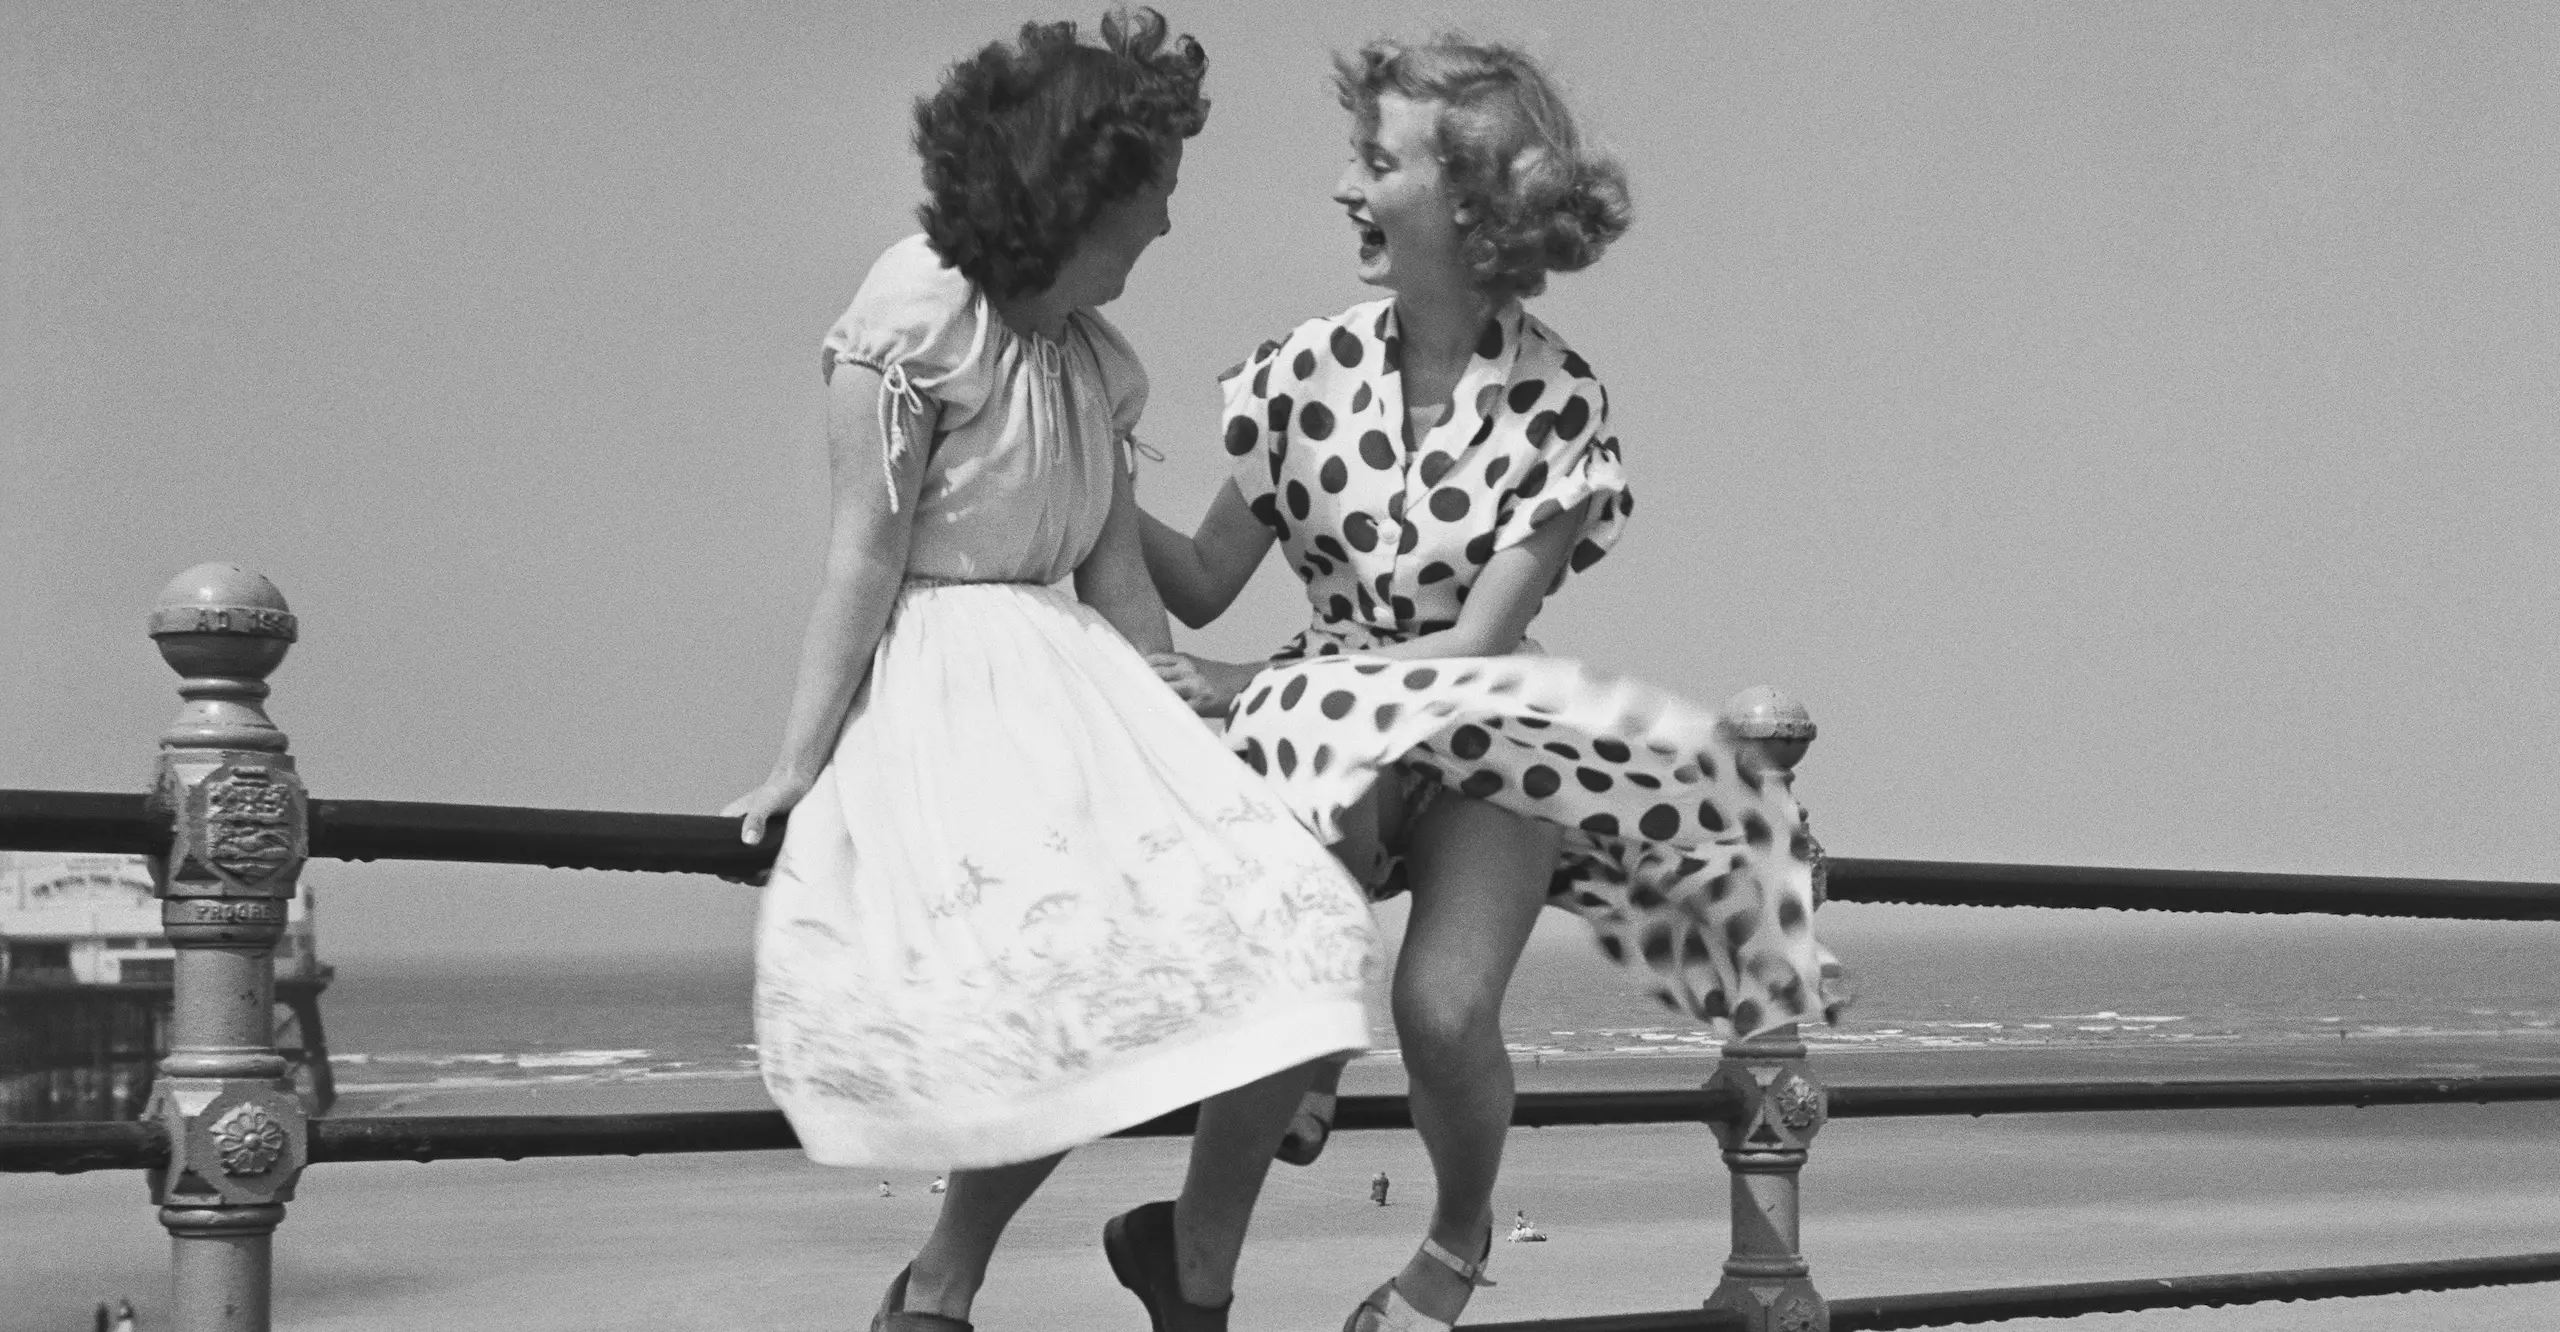 Black and white photo of two womenchatting on the railings by a beach.